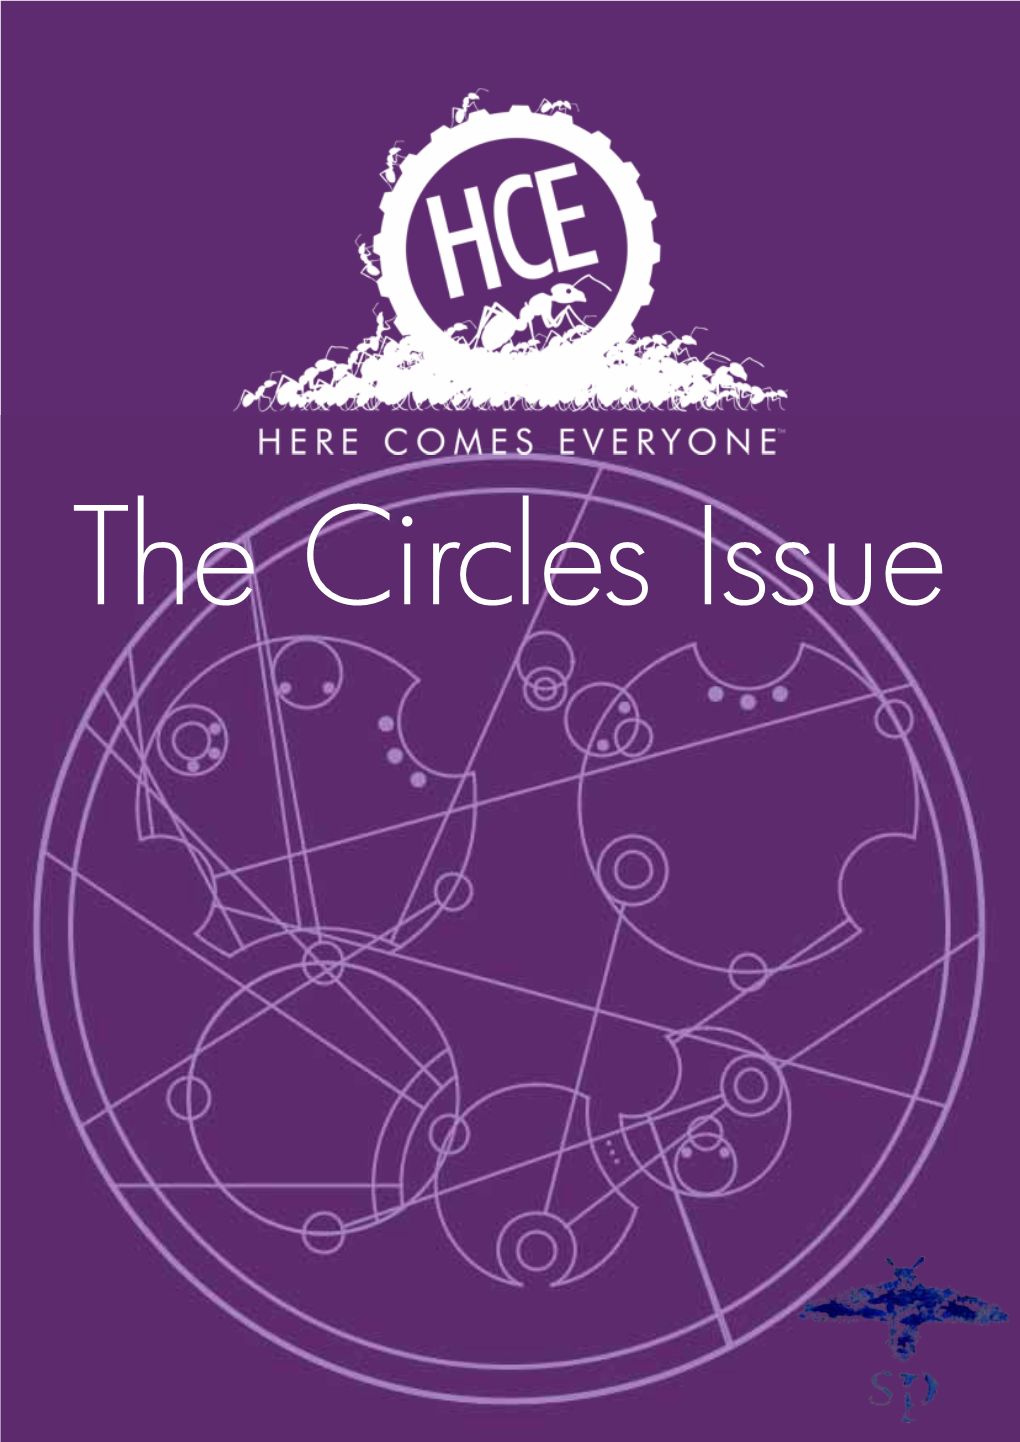 The Circles Issue Contents